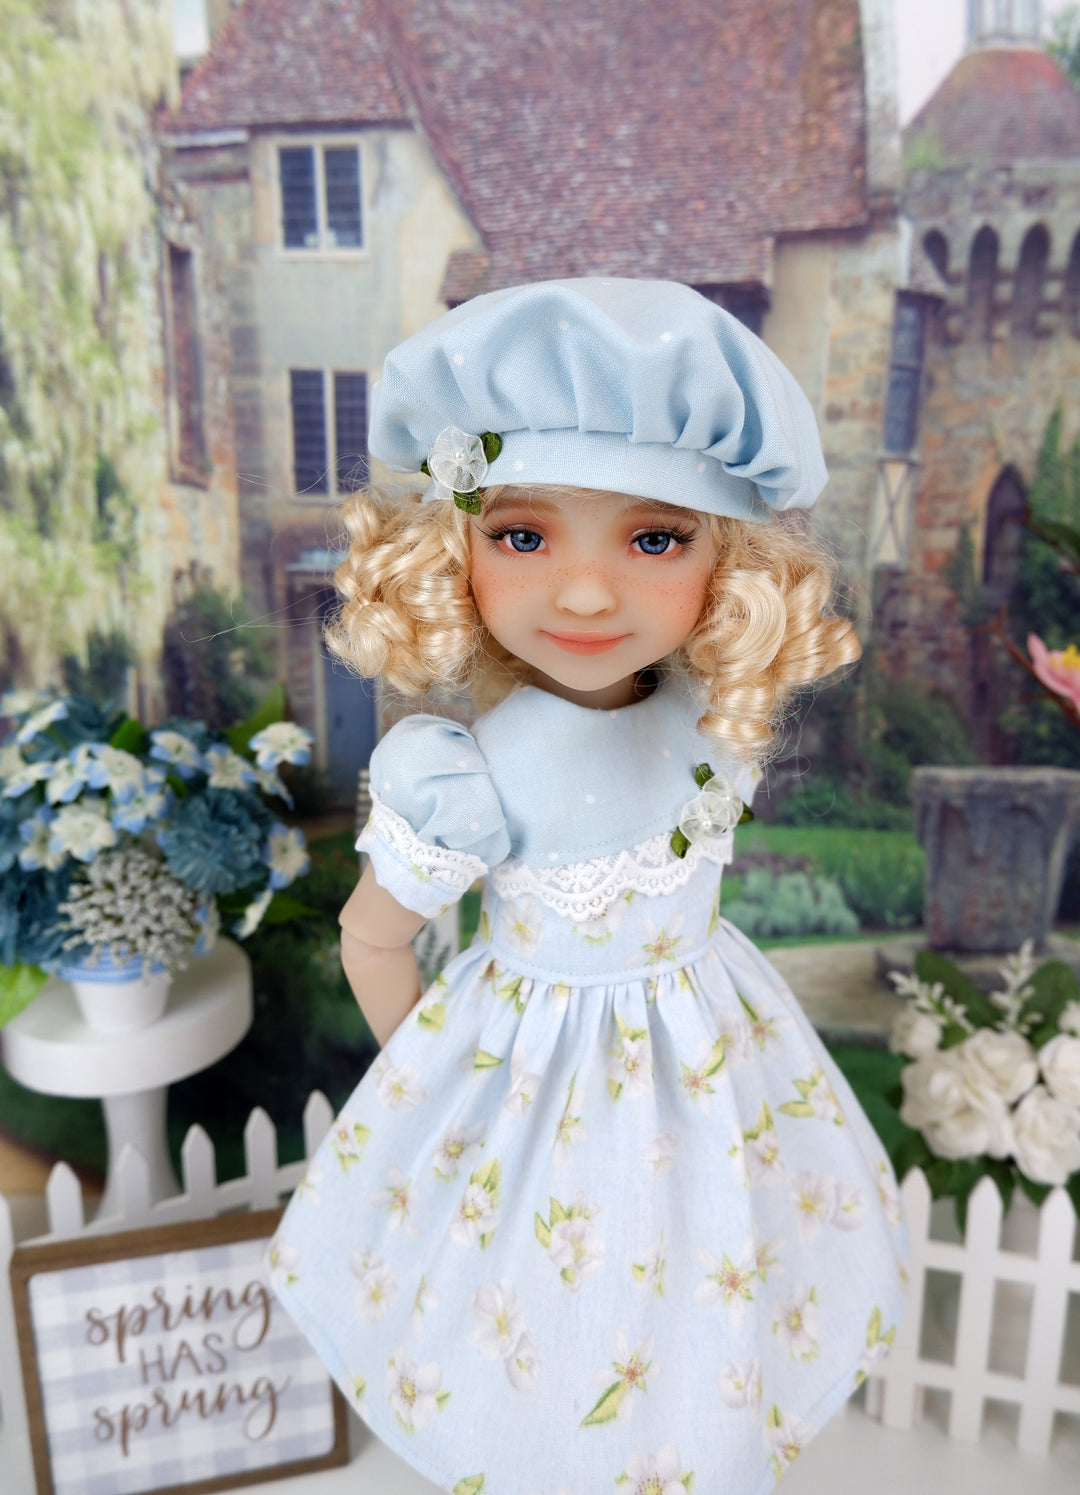 Spring Windflower - dress and shoes for Ruby Red Fashion Friends doll